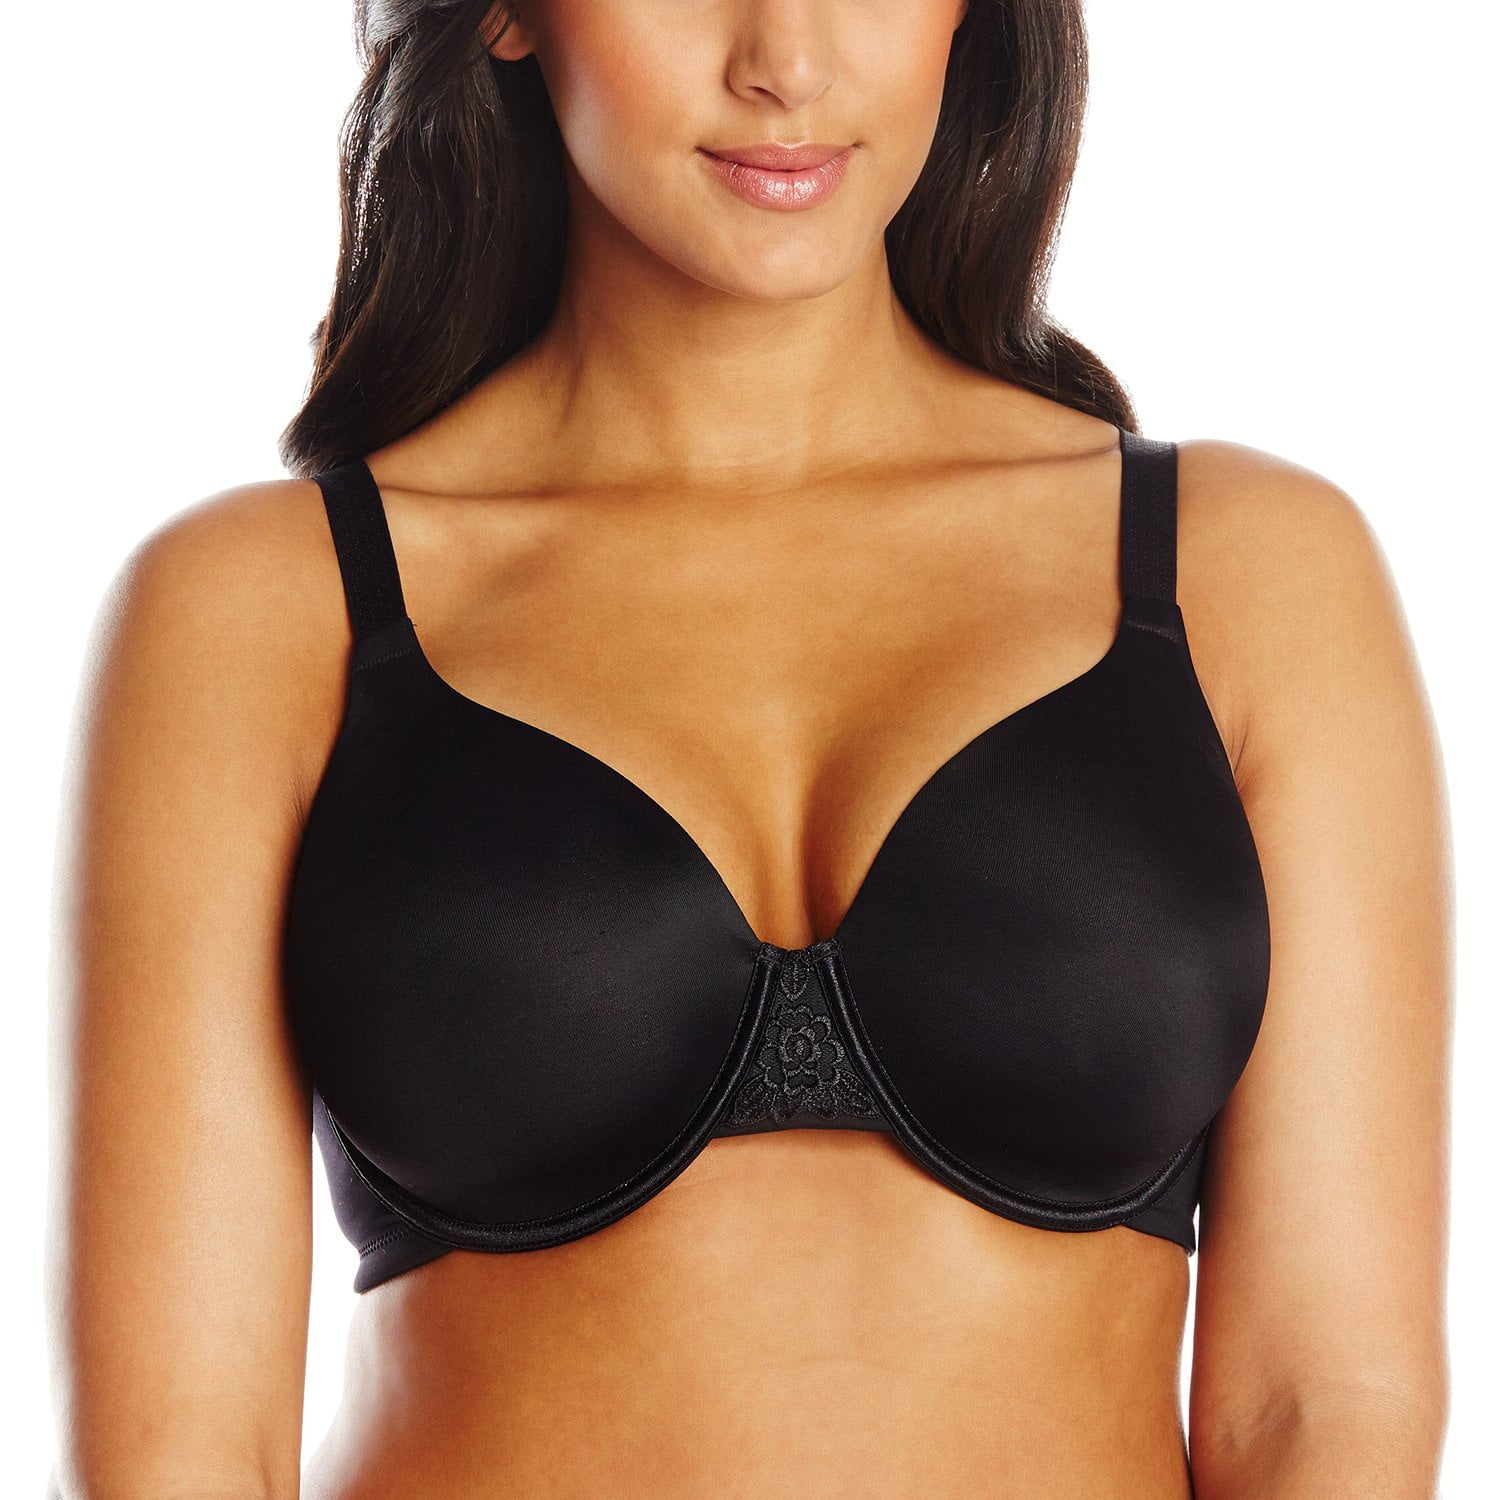 Padded bras perfect fit offer at Ackermans